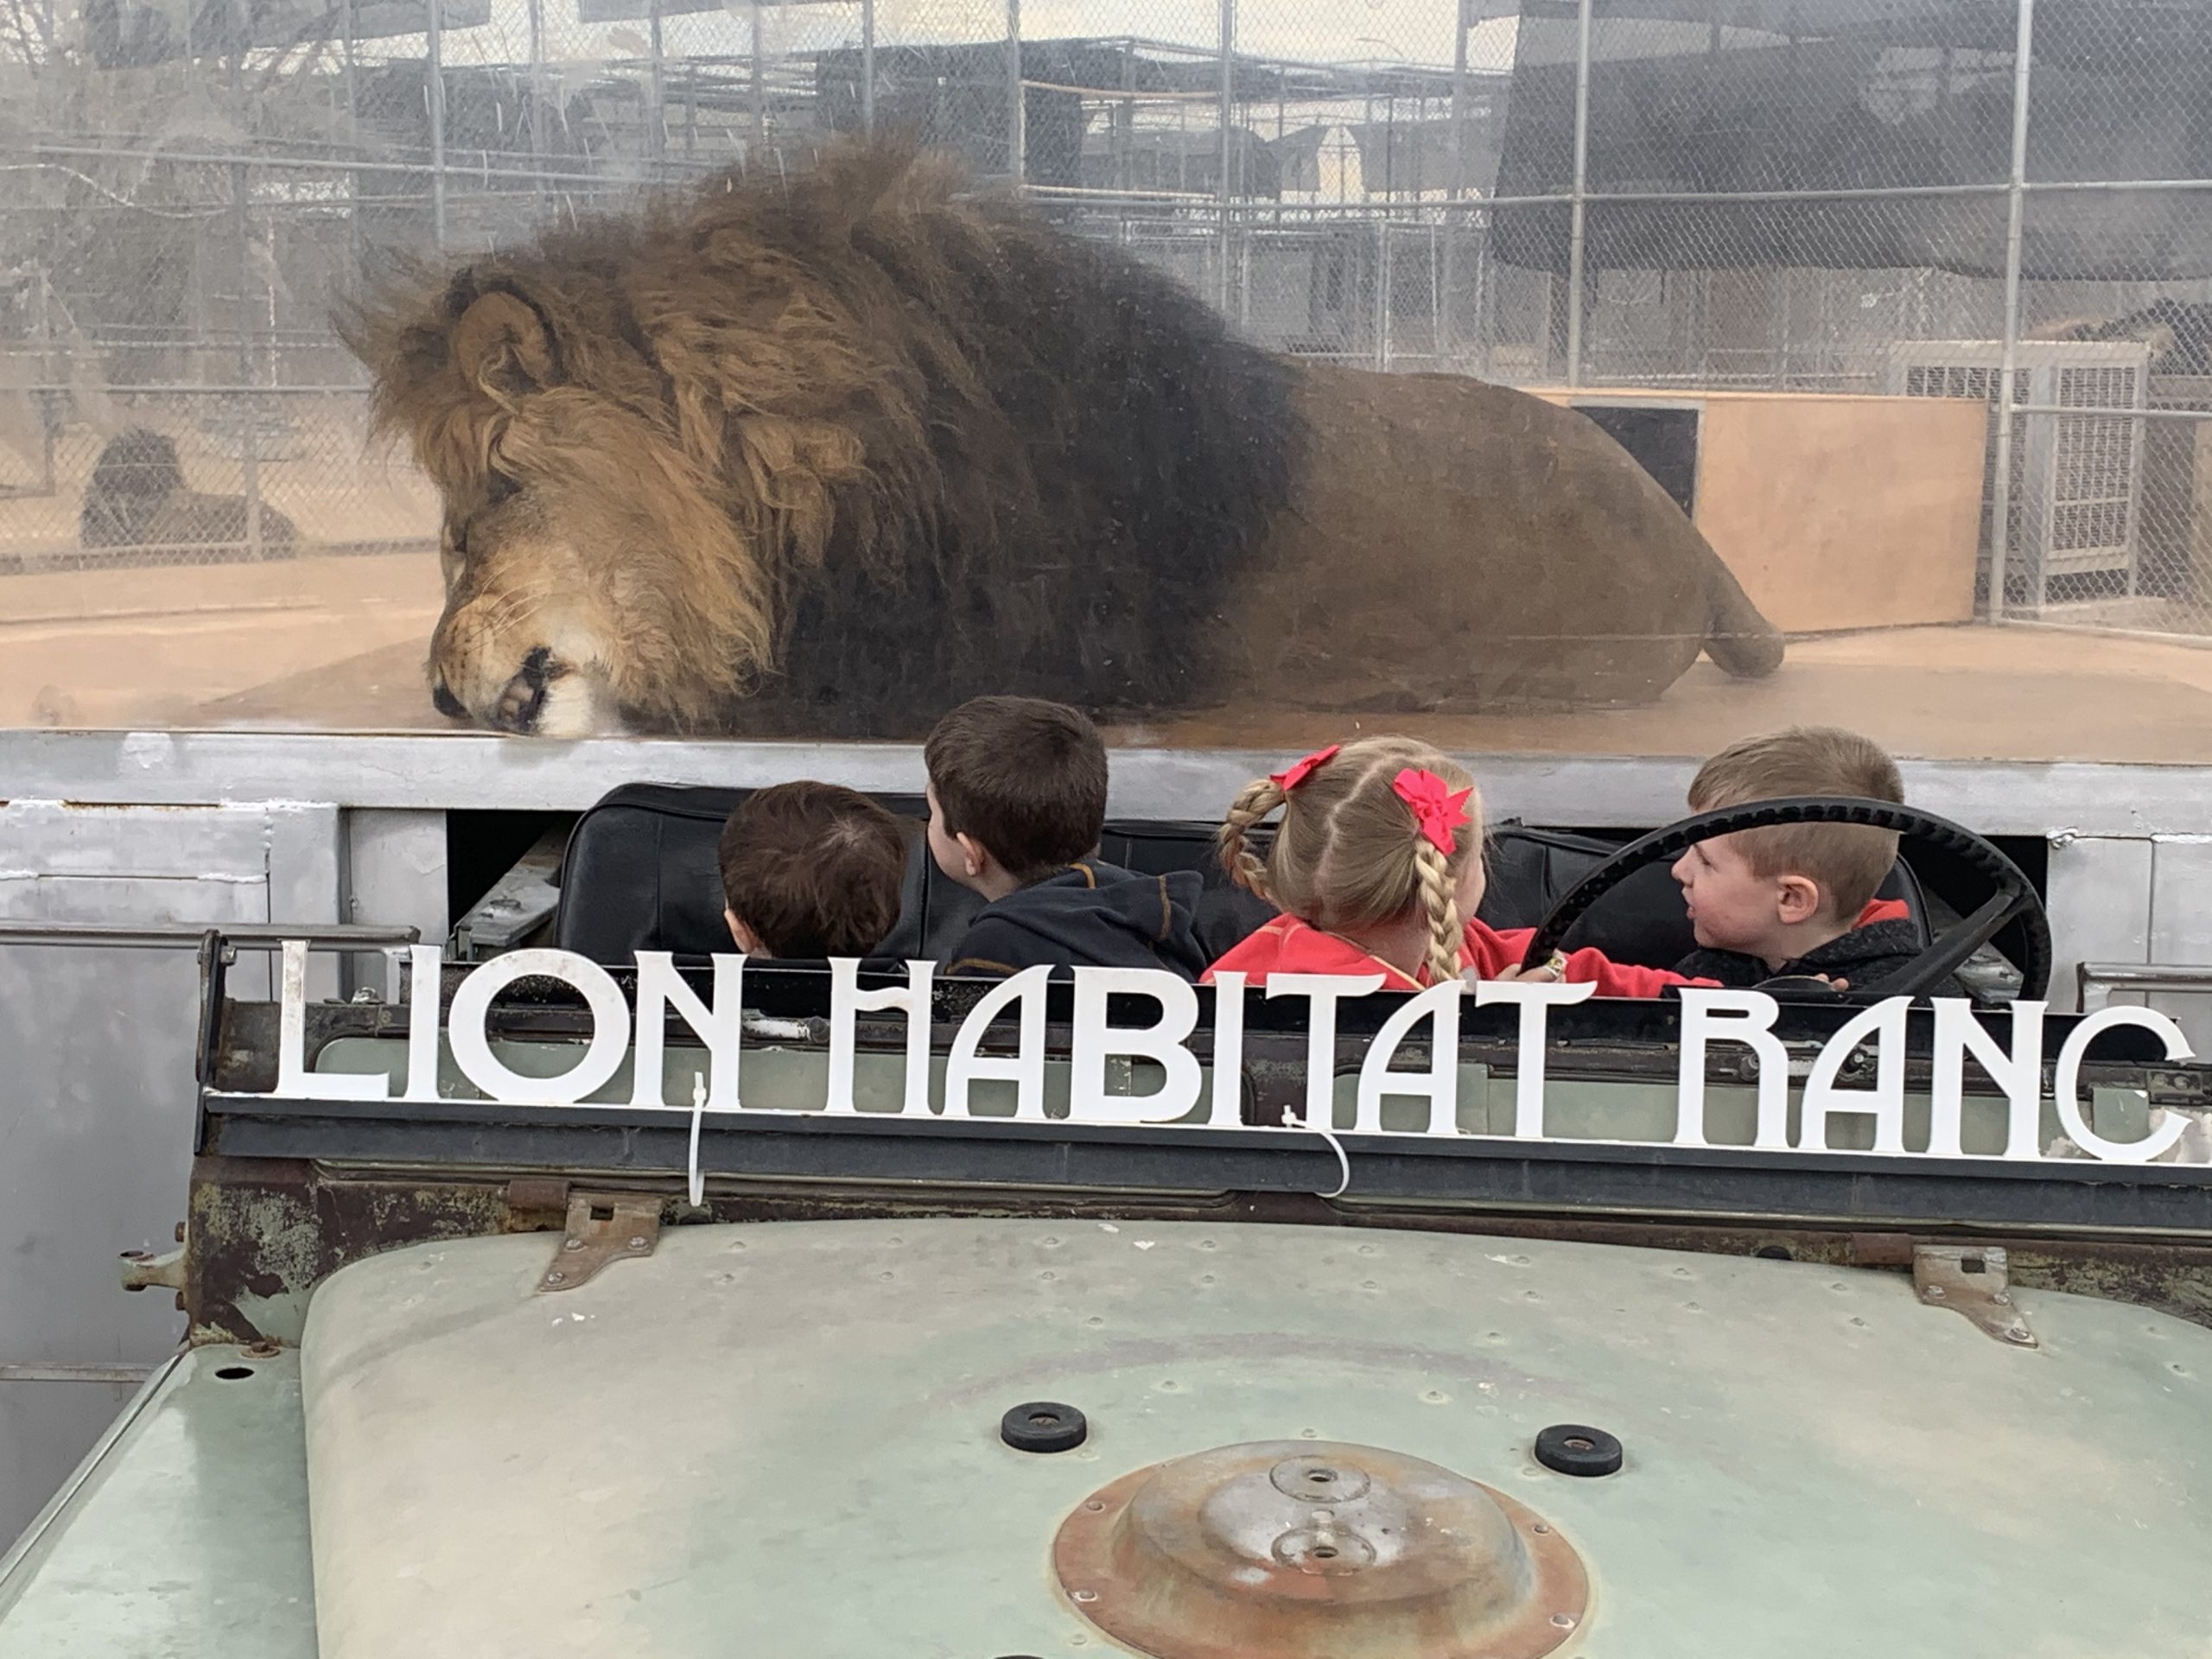 kids sitting in jeep at lion habitat ranch staring at large lion behind them